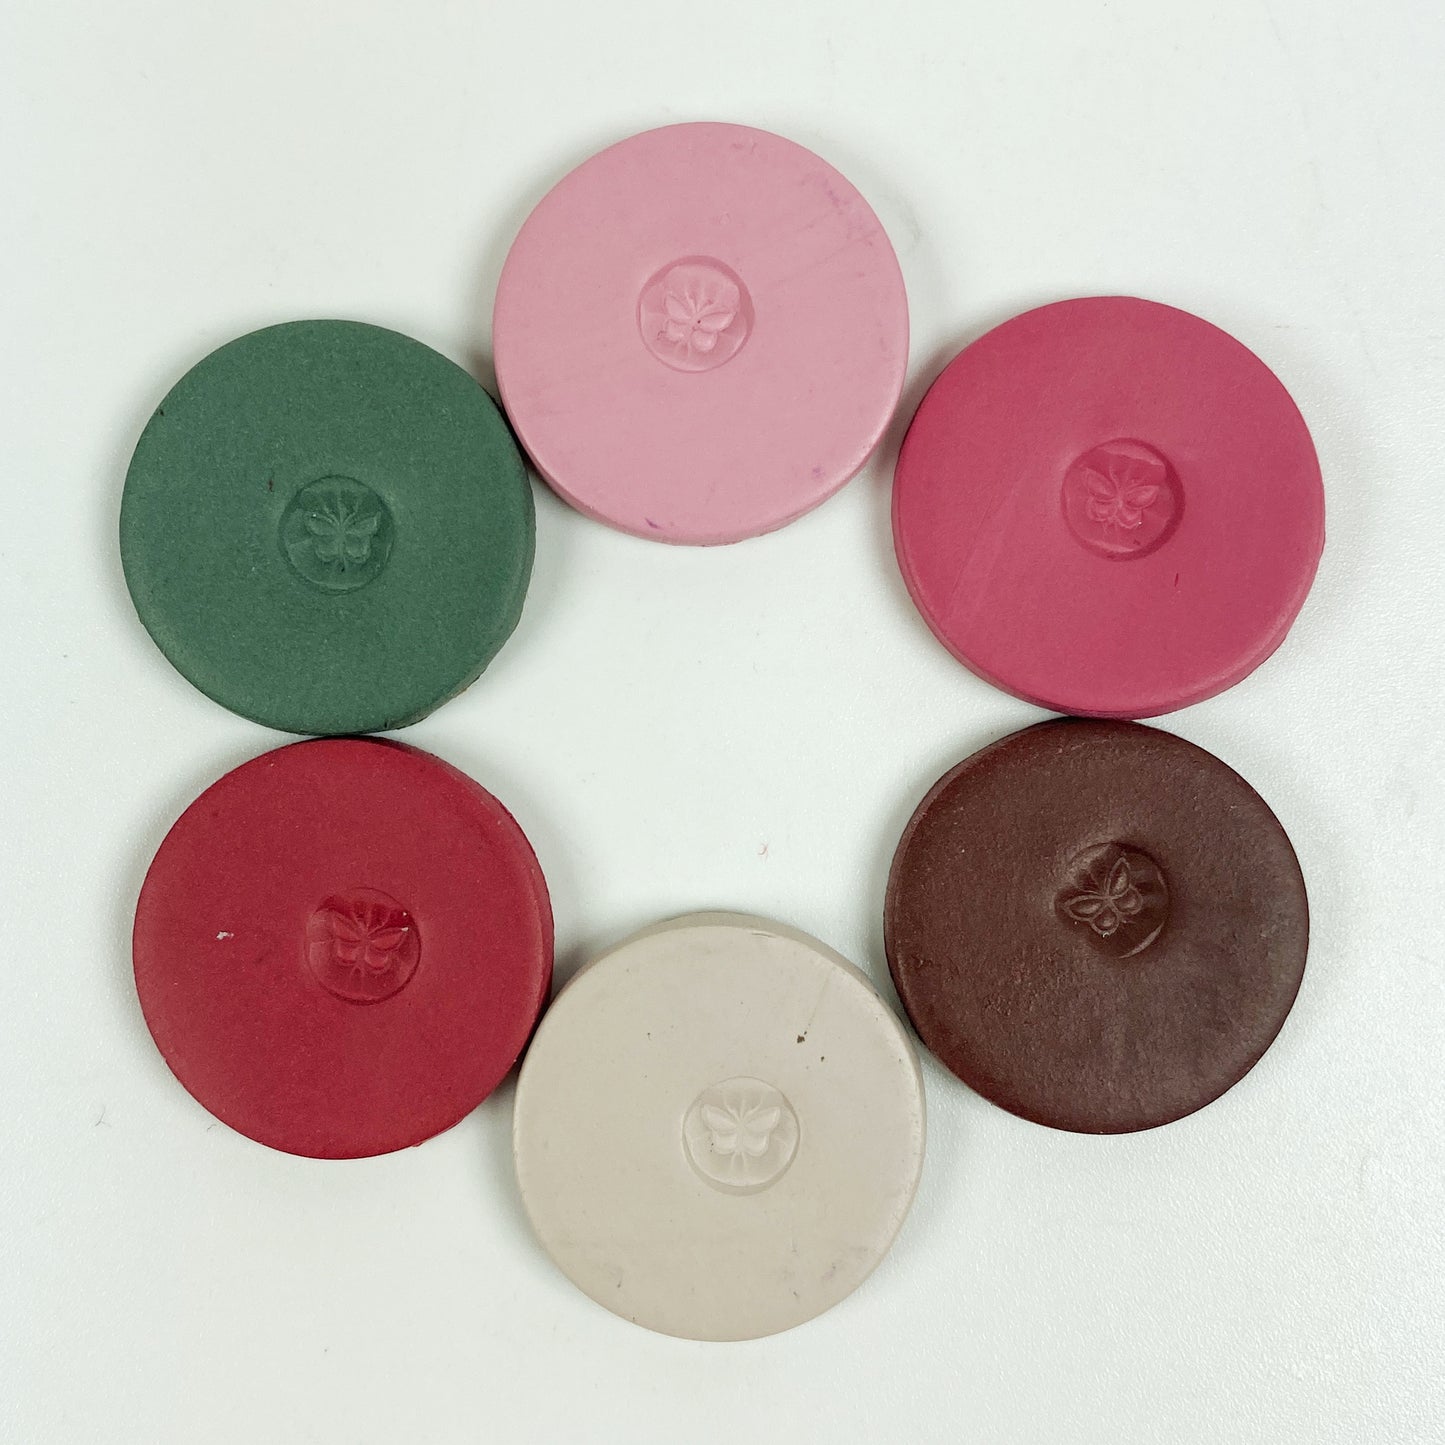 Discs of Polymer Clay in all 6 coffee colors of this palette, arranged in a ring.